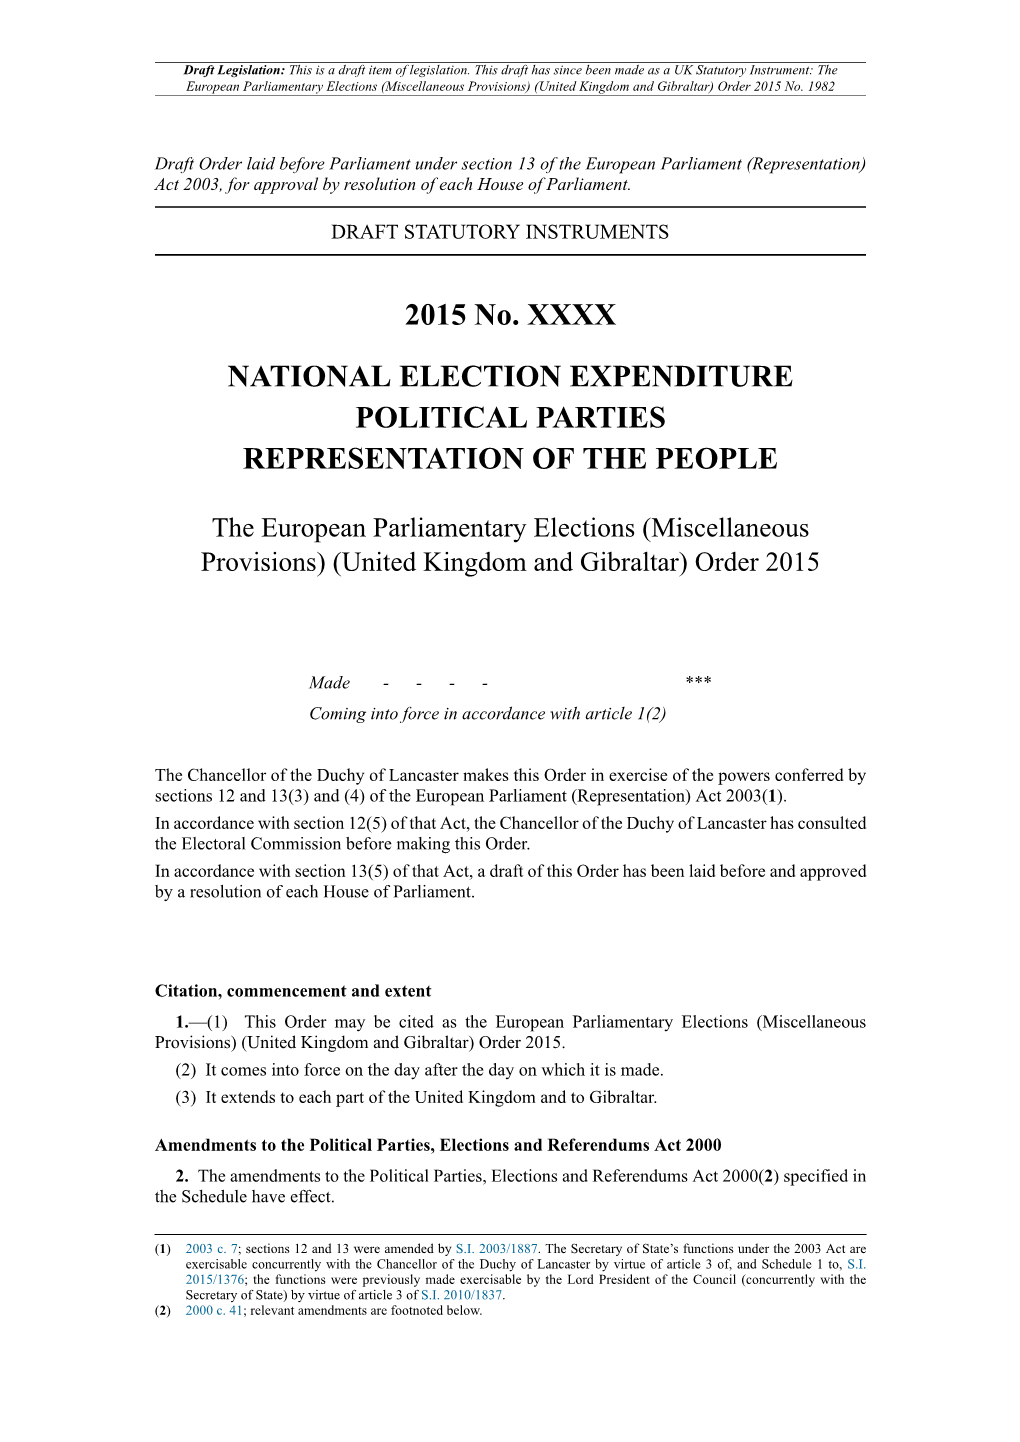 The European Parliamentary Elections (Miscellaneous Provisions) (United Kingdom and Gibraltar) Order 2015 No